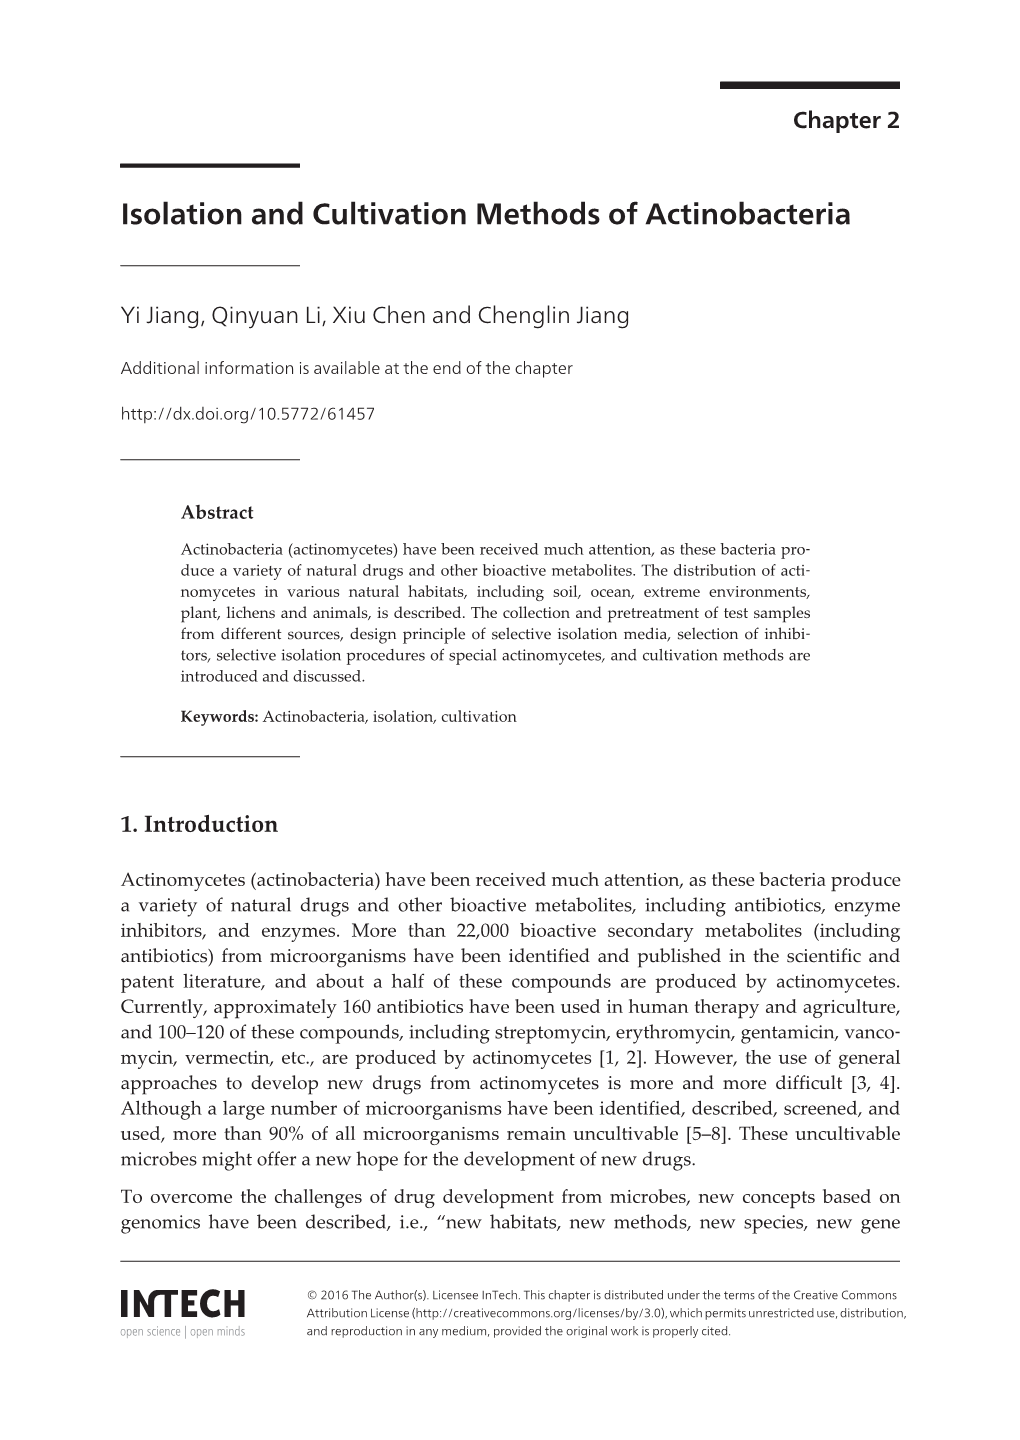 Isolation and Cultivation Methods of Actinobacteria